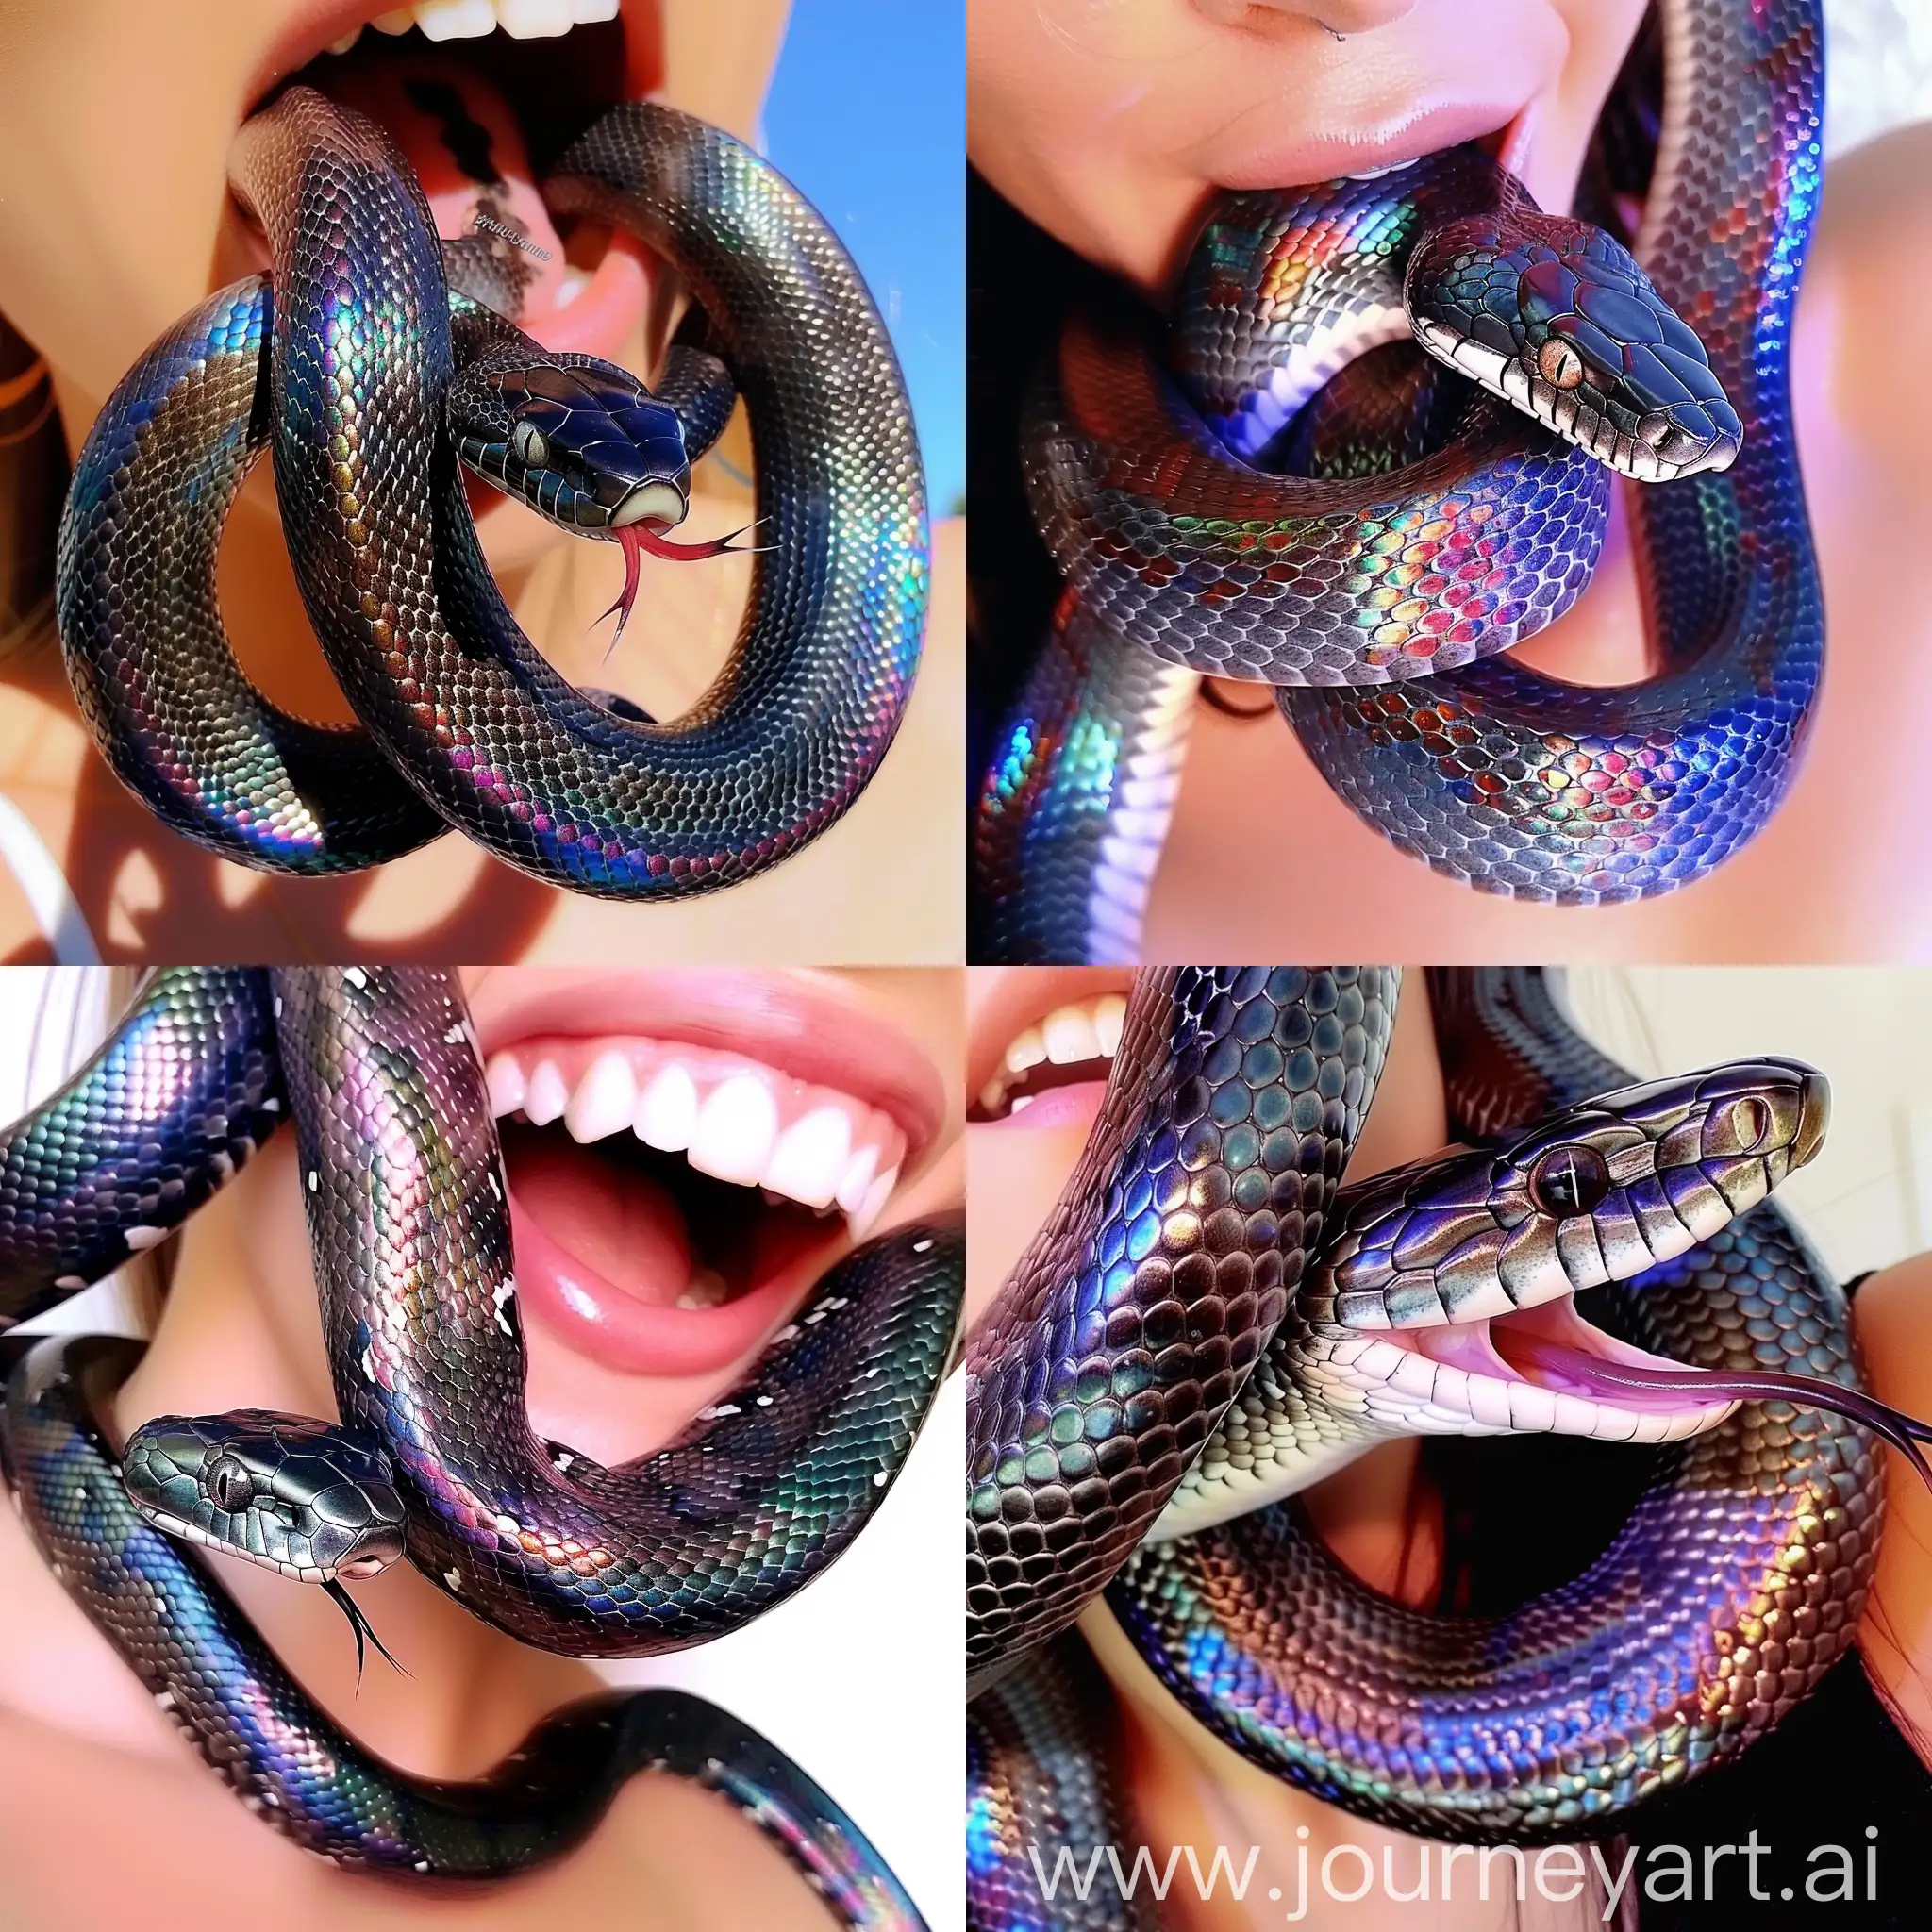 A portrait of a snake coming out of a woman's mouth, studio photo, white background --sref https://i.pinimg.com/originals/1c/46/8a/1c468ab47254128677bae852aed08dce.jpg --v 6 --style raw --ar 16:16